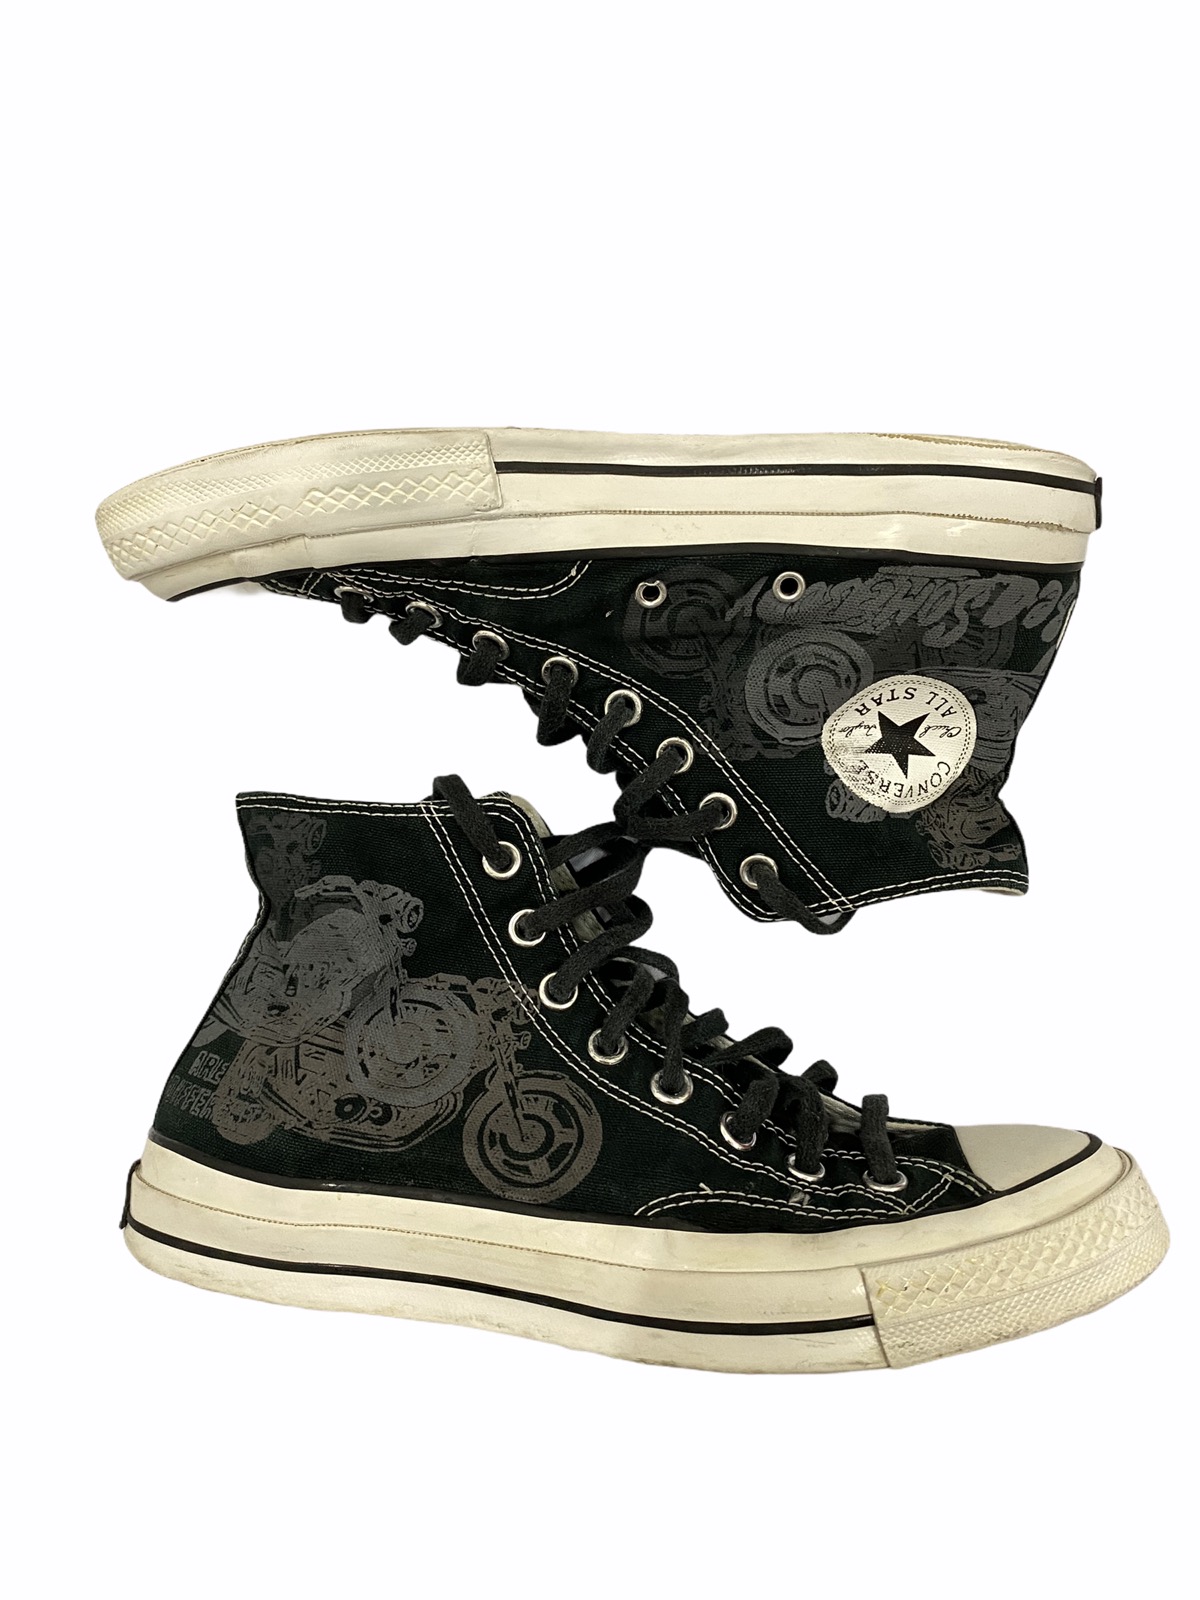 Converse All Star Andy Warhol High Sneaker - 2